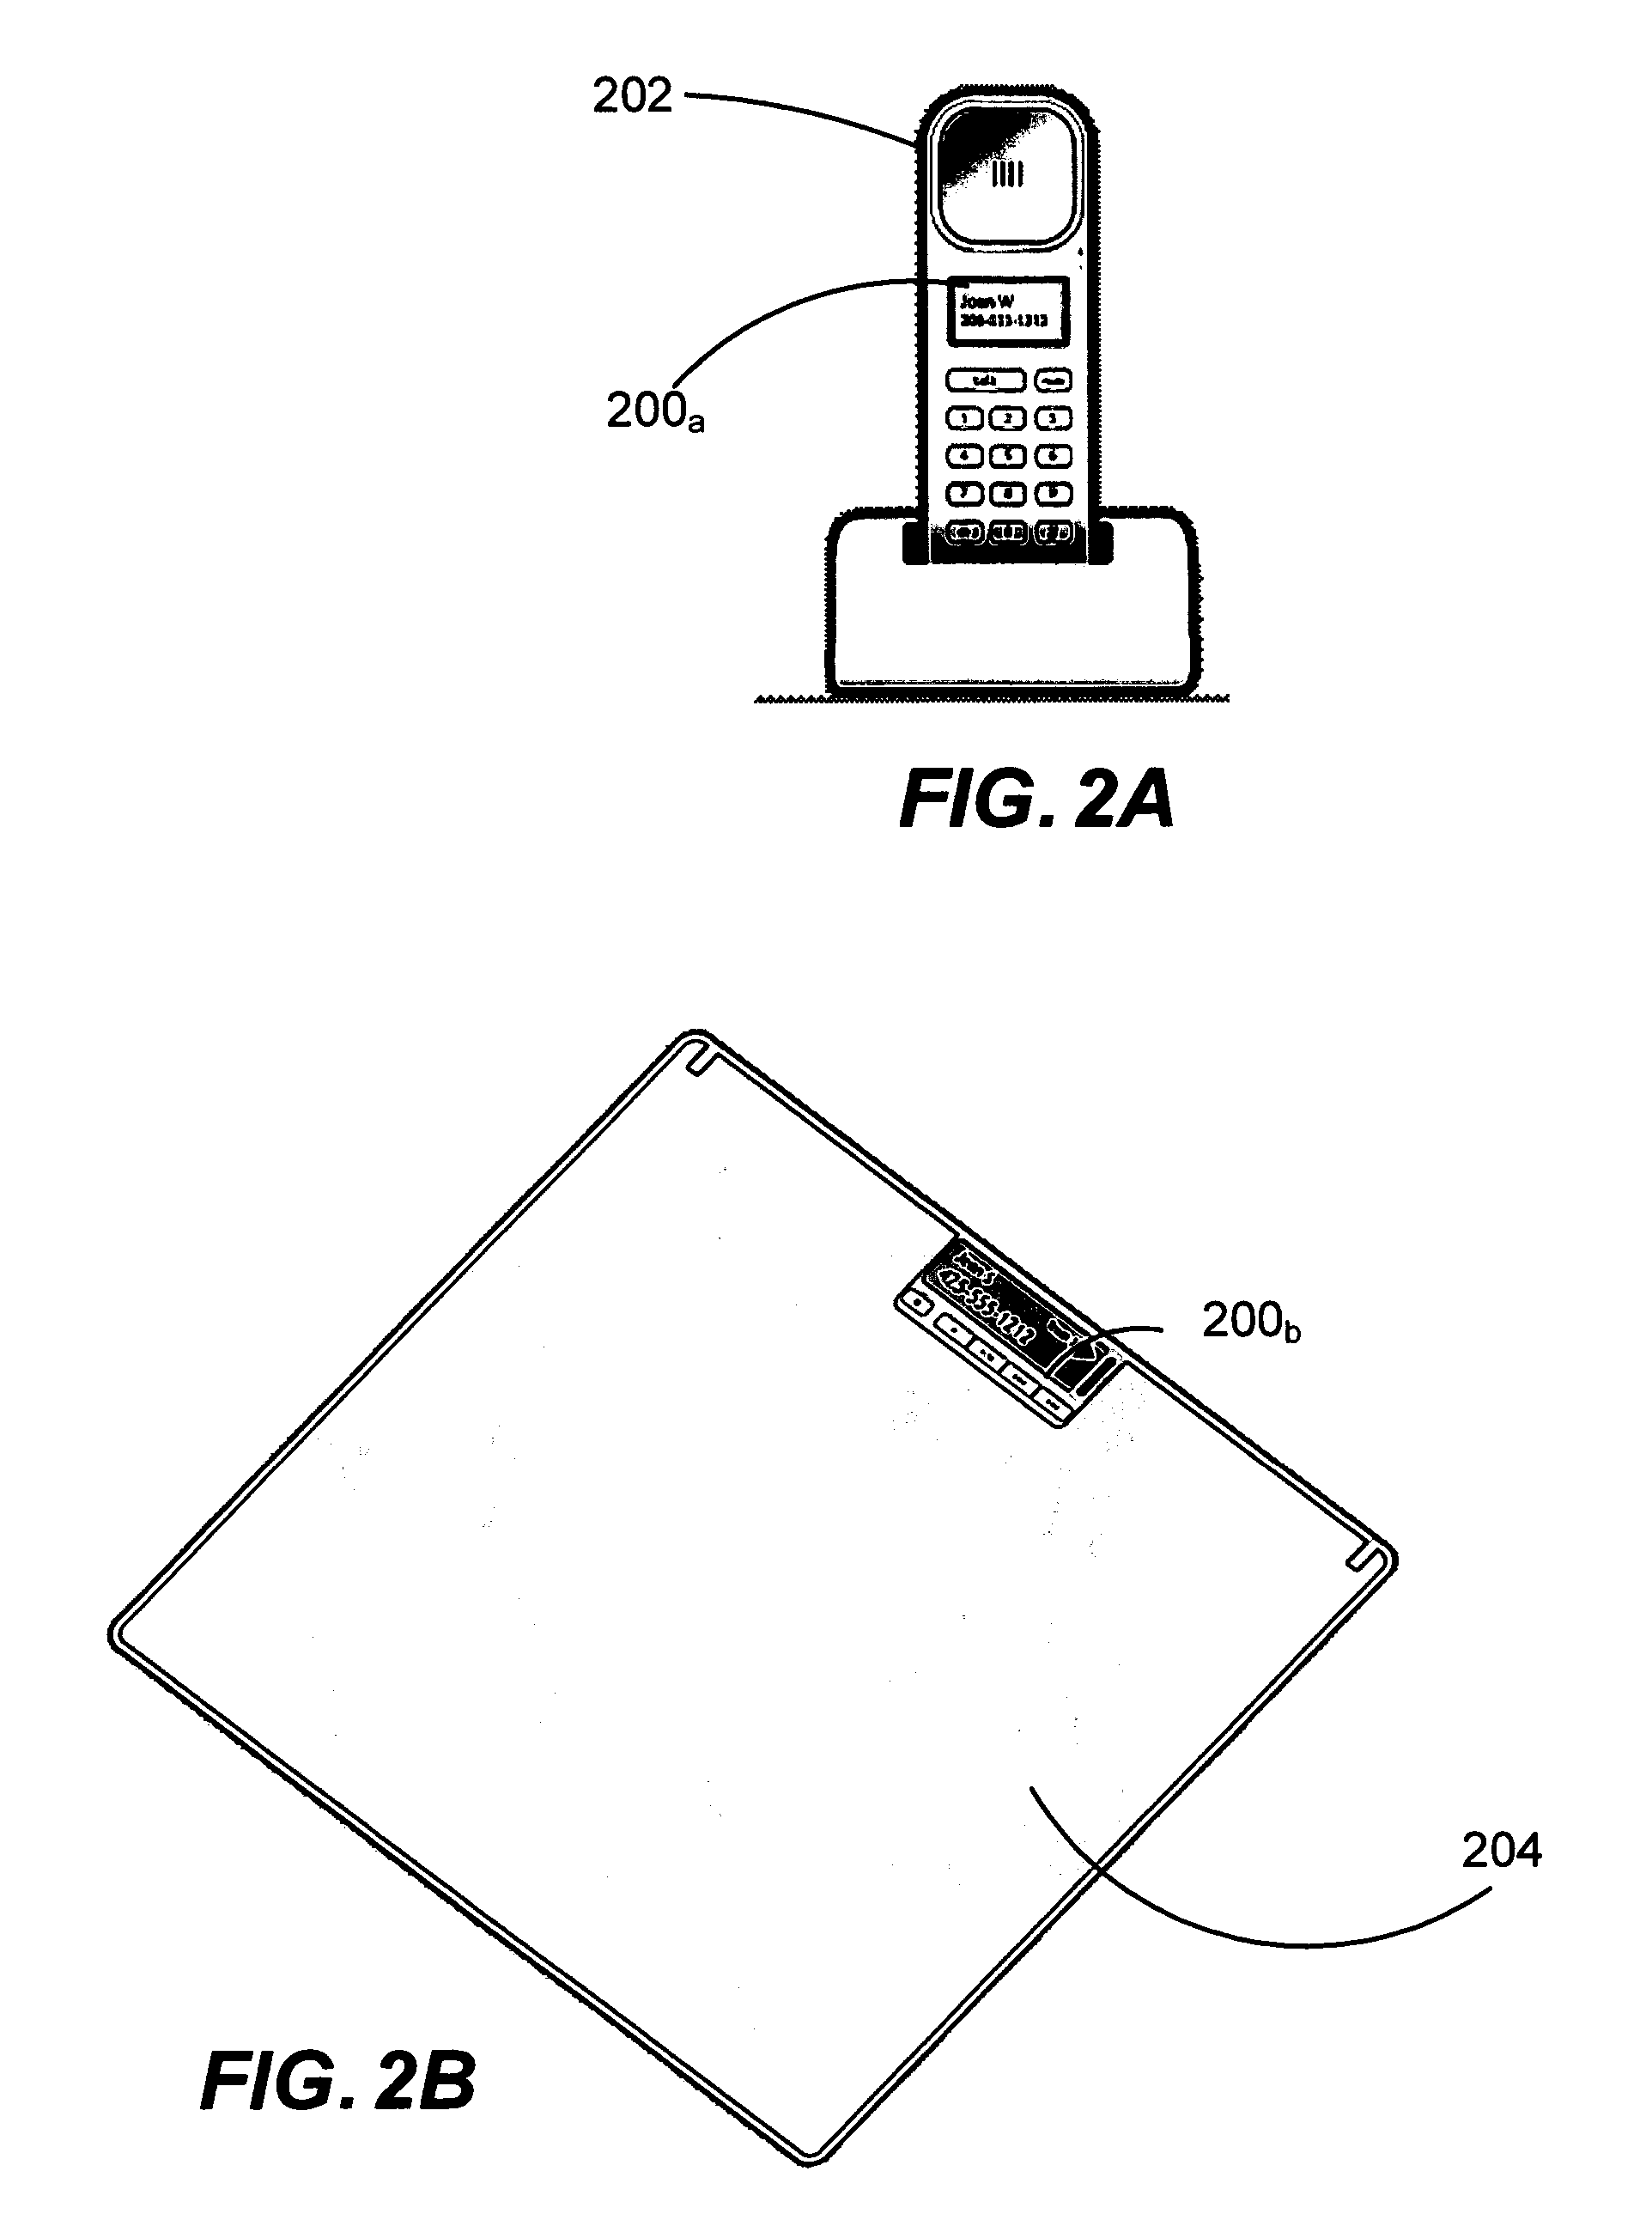 Extensible architecture for auxiliary displays